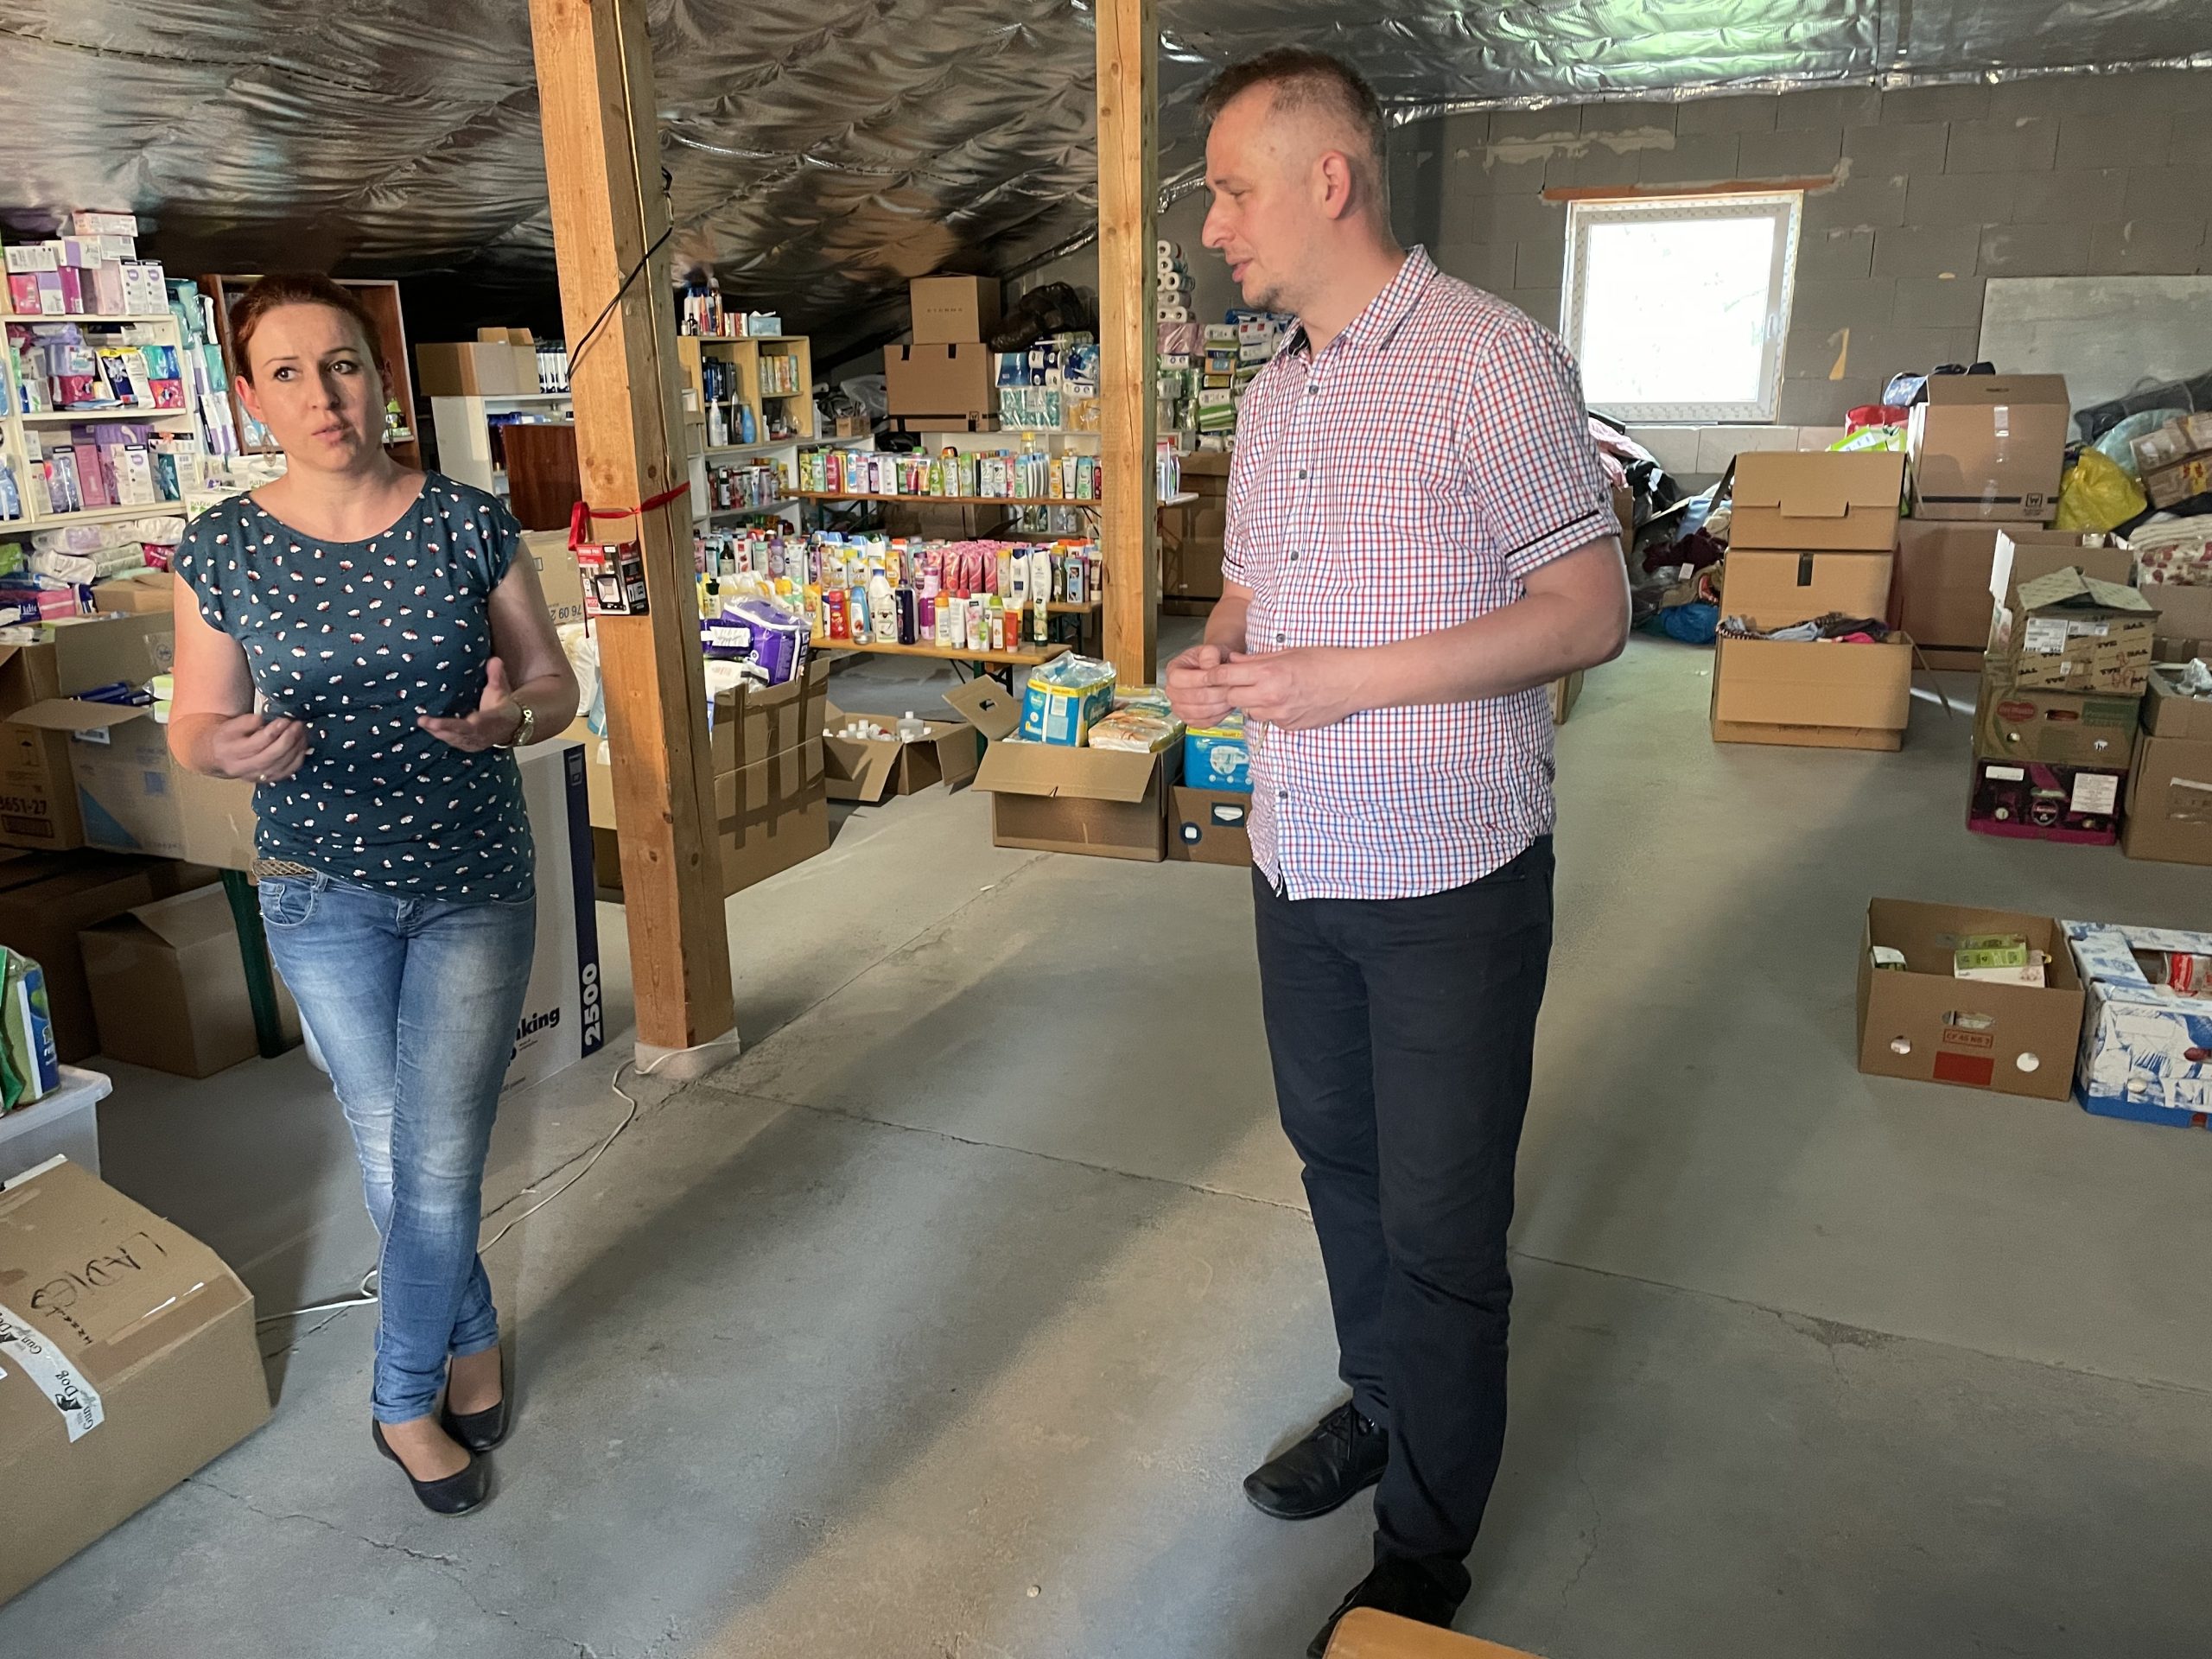 An image of two people, a man and a woman, in a stocked warehouse in Slovakia.